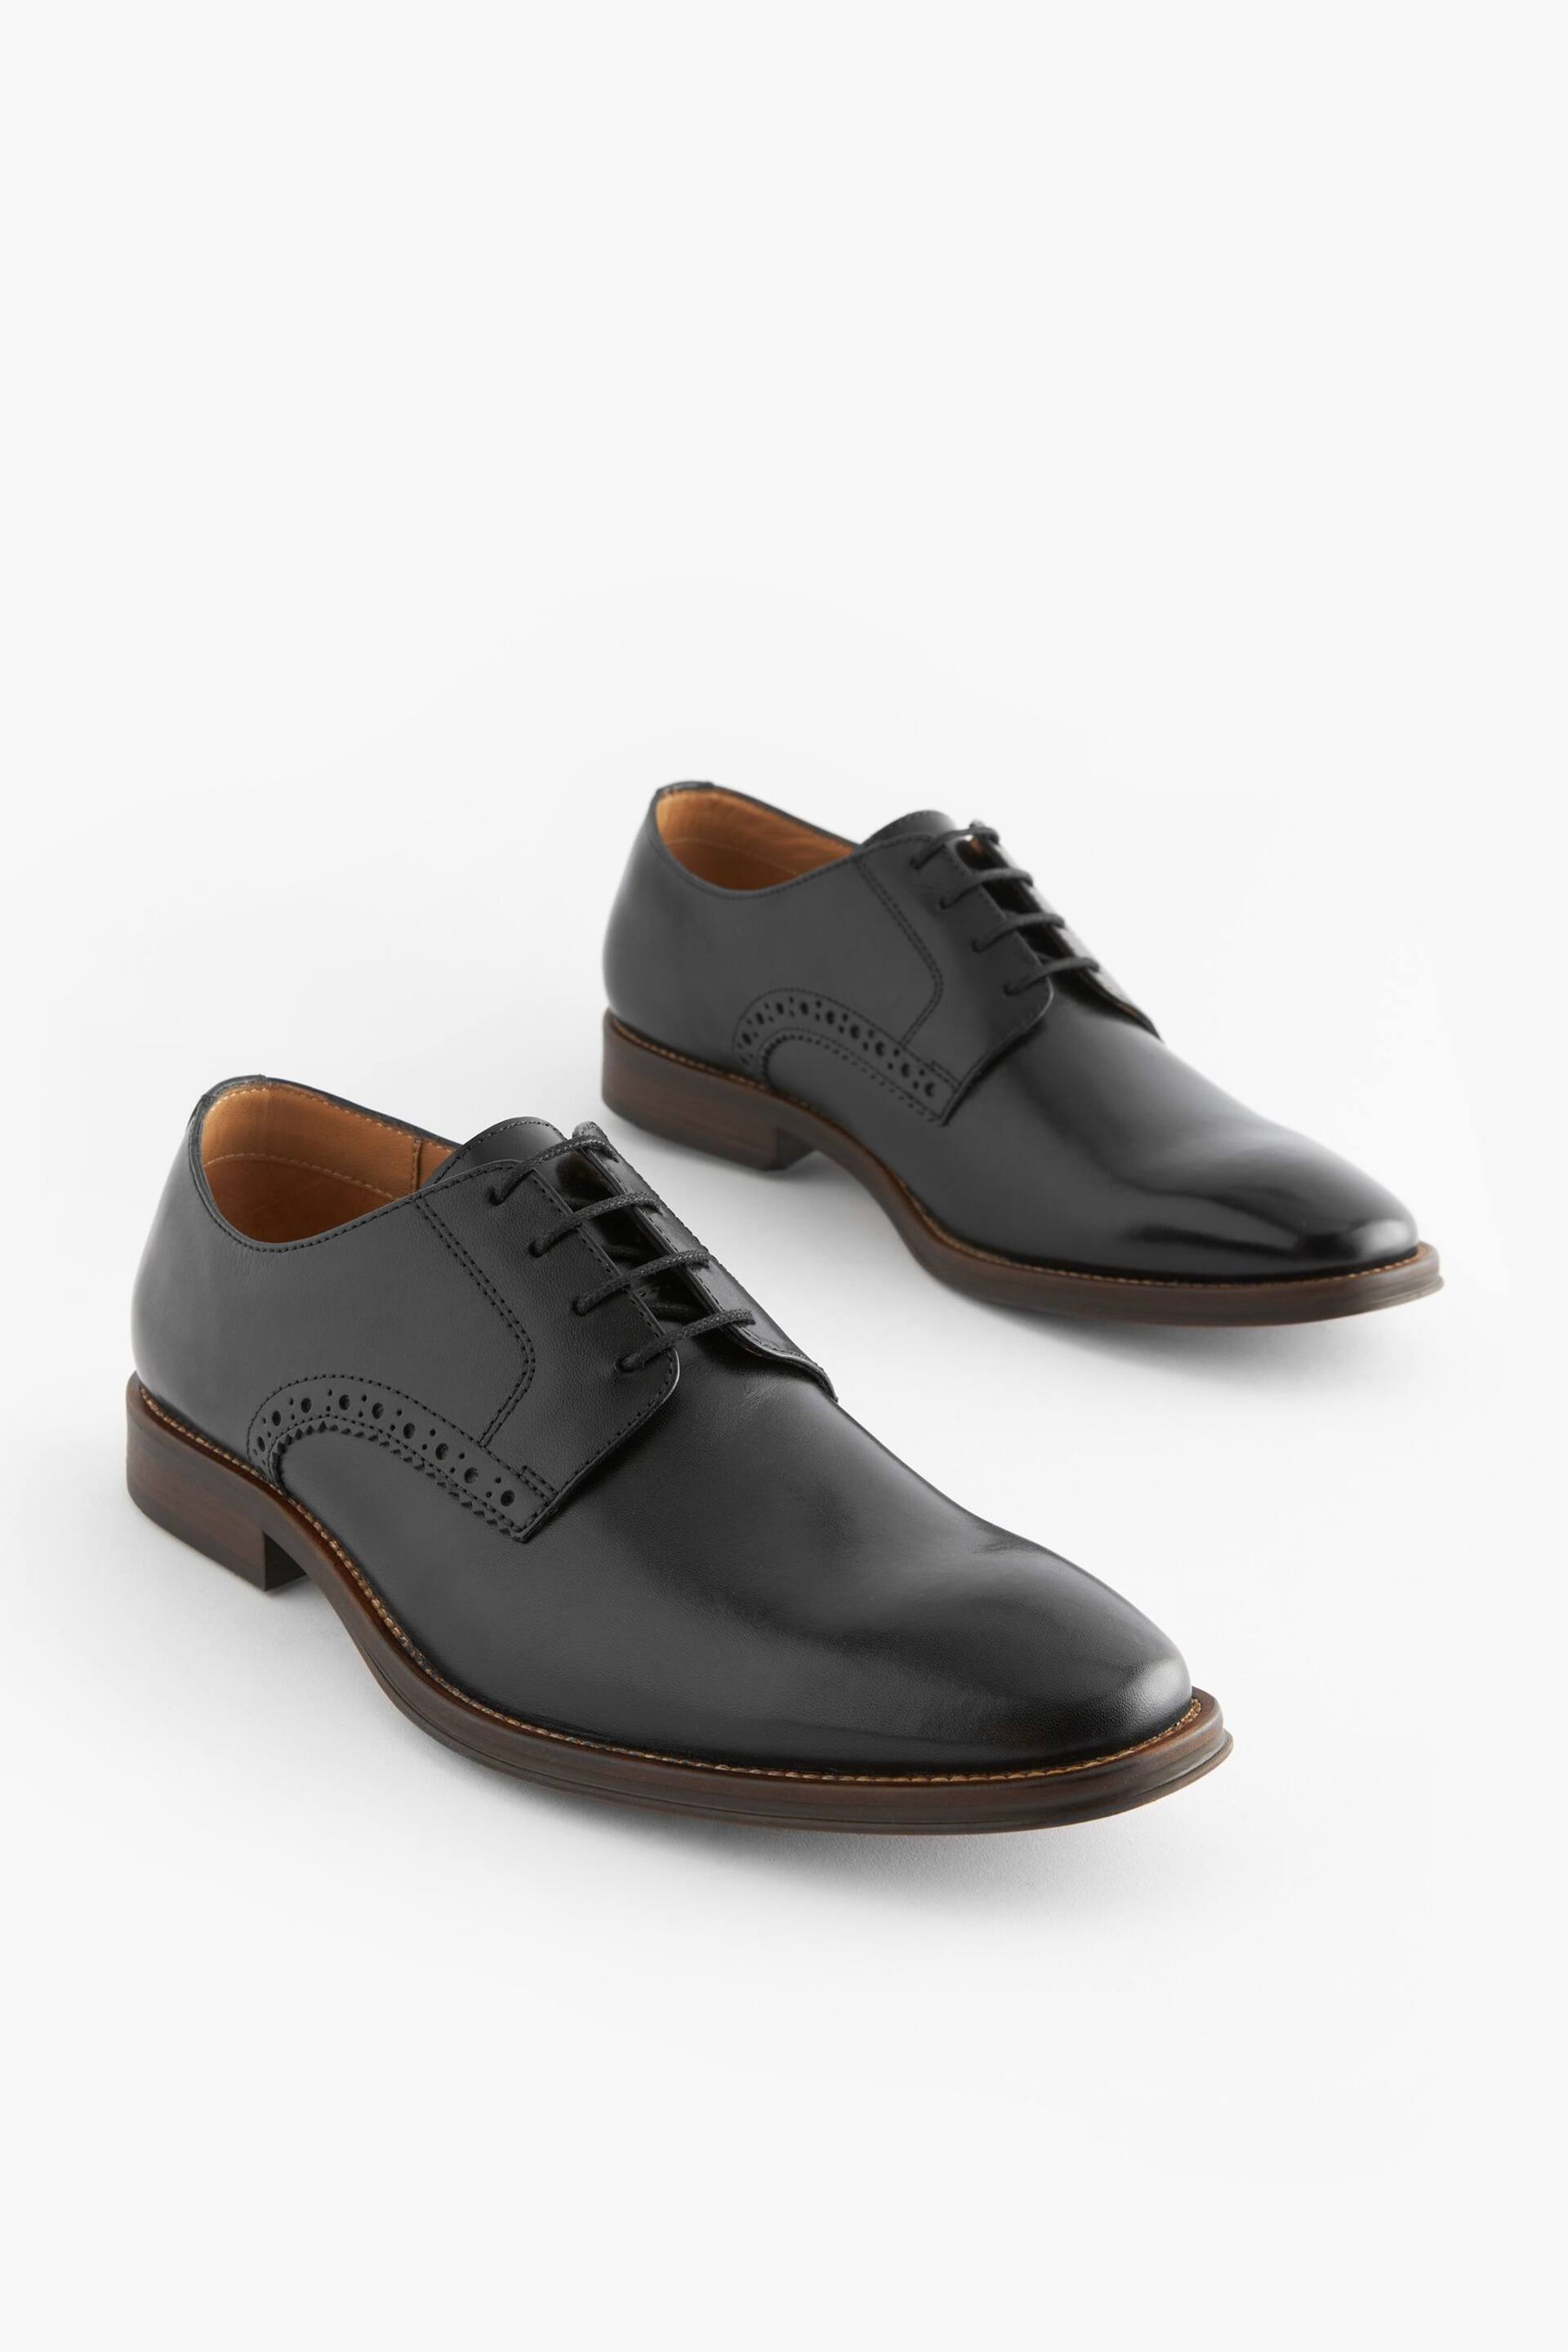 Black Regular Fit Leather Contrast Sole Derby Shoes - Image 2 of 6